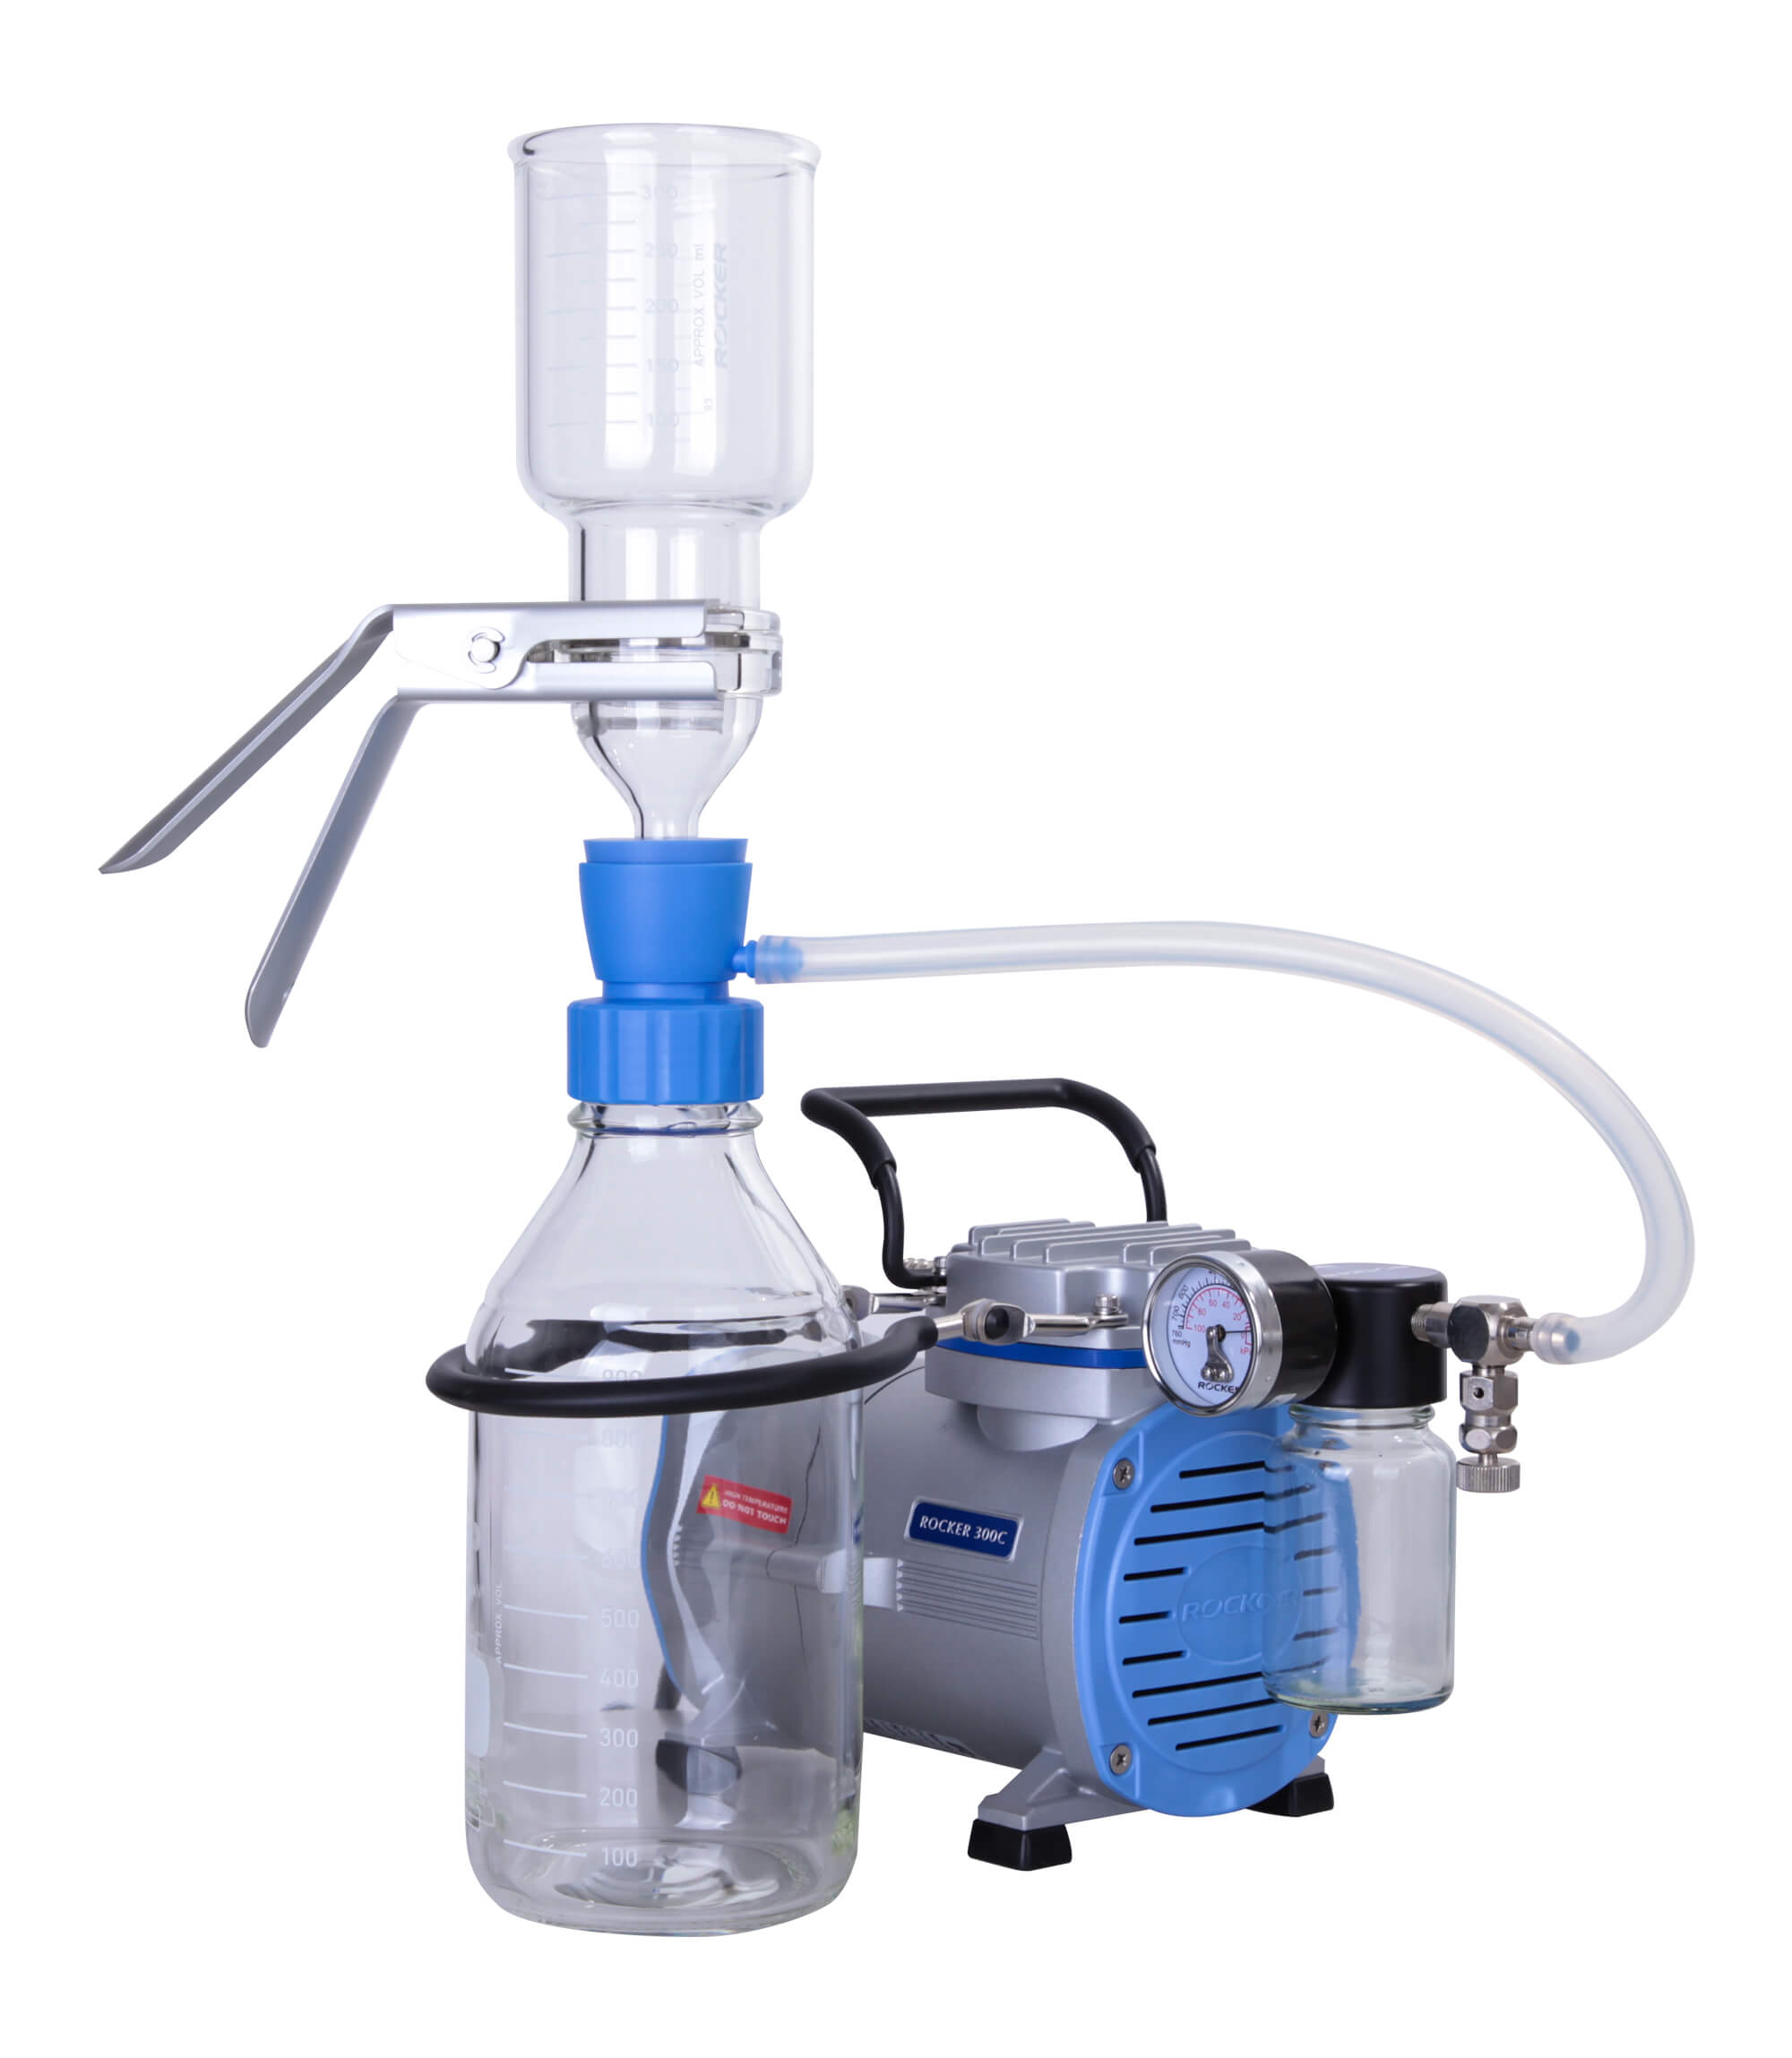 a complete lab-scale solvent purification and solvent filtration system with vacuum pump, filtration funnels and flask